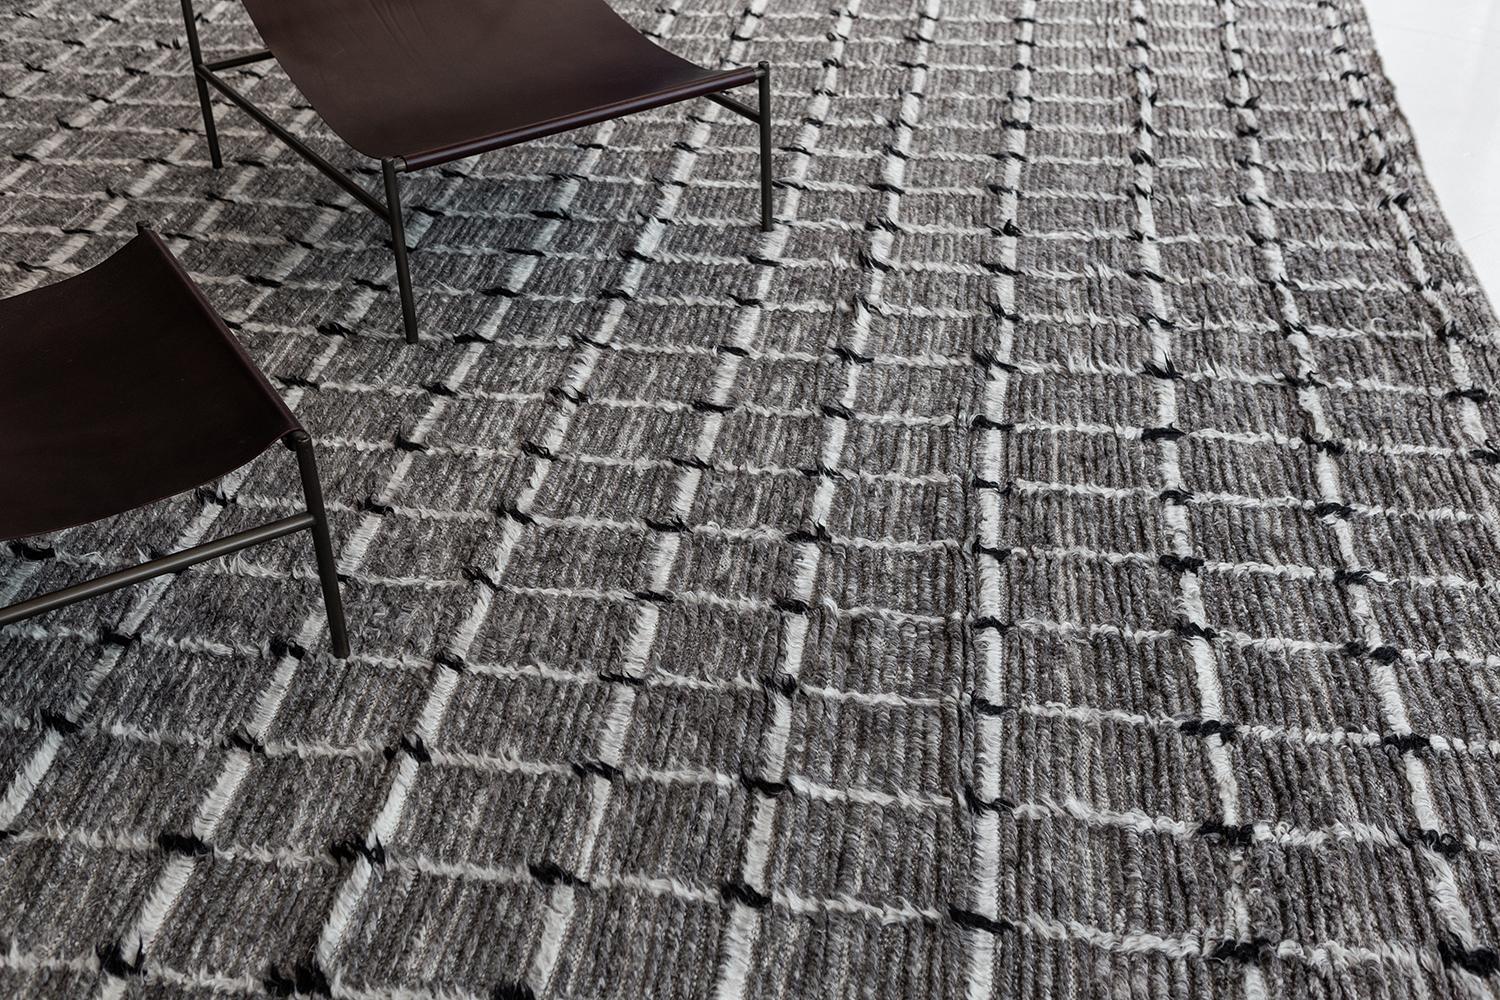 Amihan is a beautifully detailed pile weave from our Atlas collection. The delicate checkered and ribbed style rug with earthy charcoal tones give it a rich and charming feel. Repeating black pile detailing also brings a bold and noteworthy